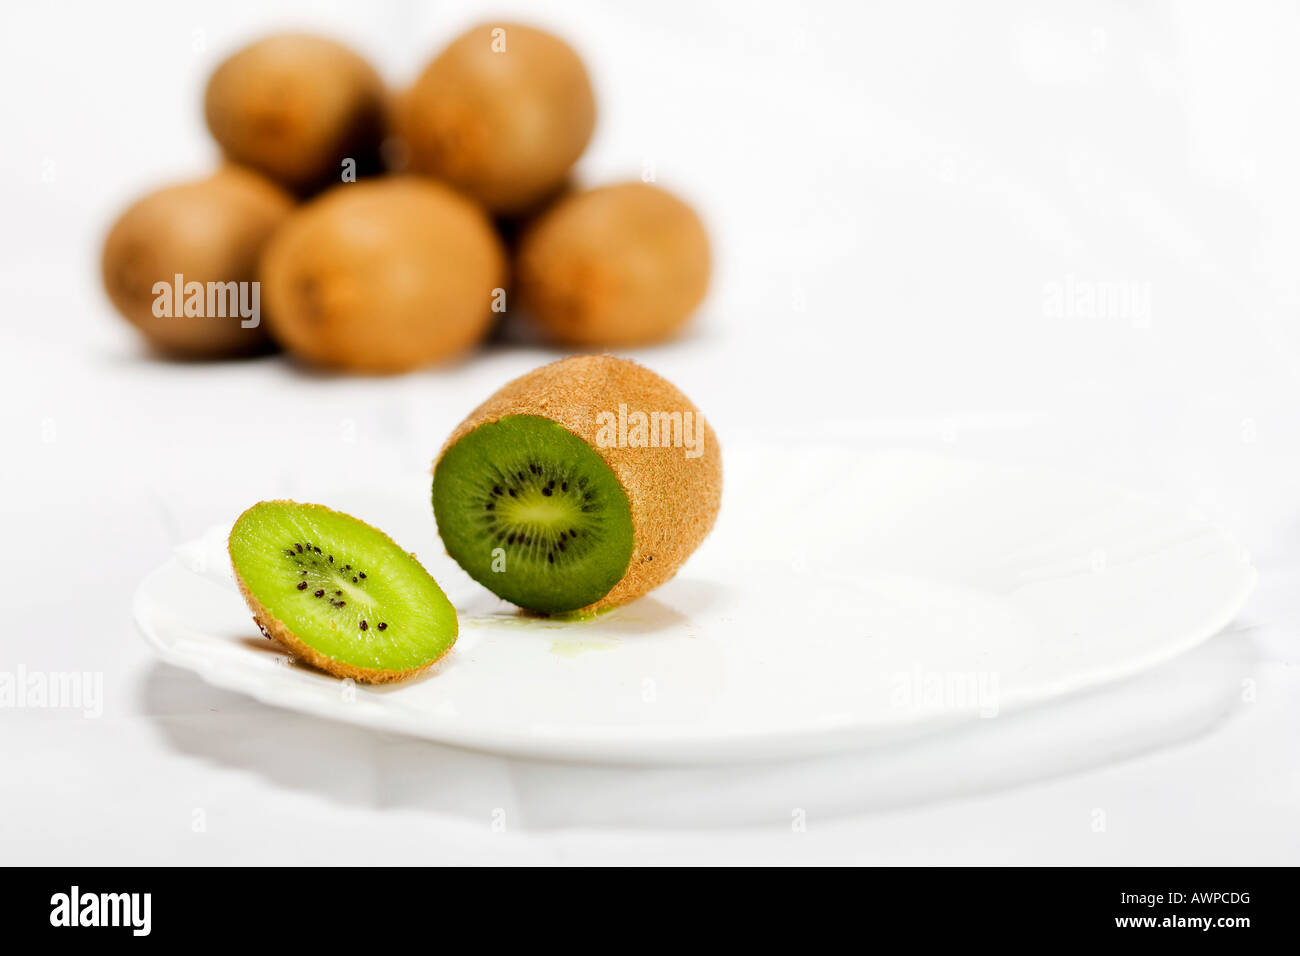 Single kiwi cut open on a plate, more kiwis piled at the back Stock Photo